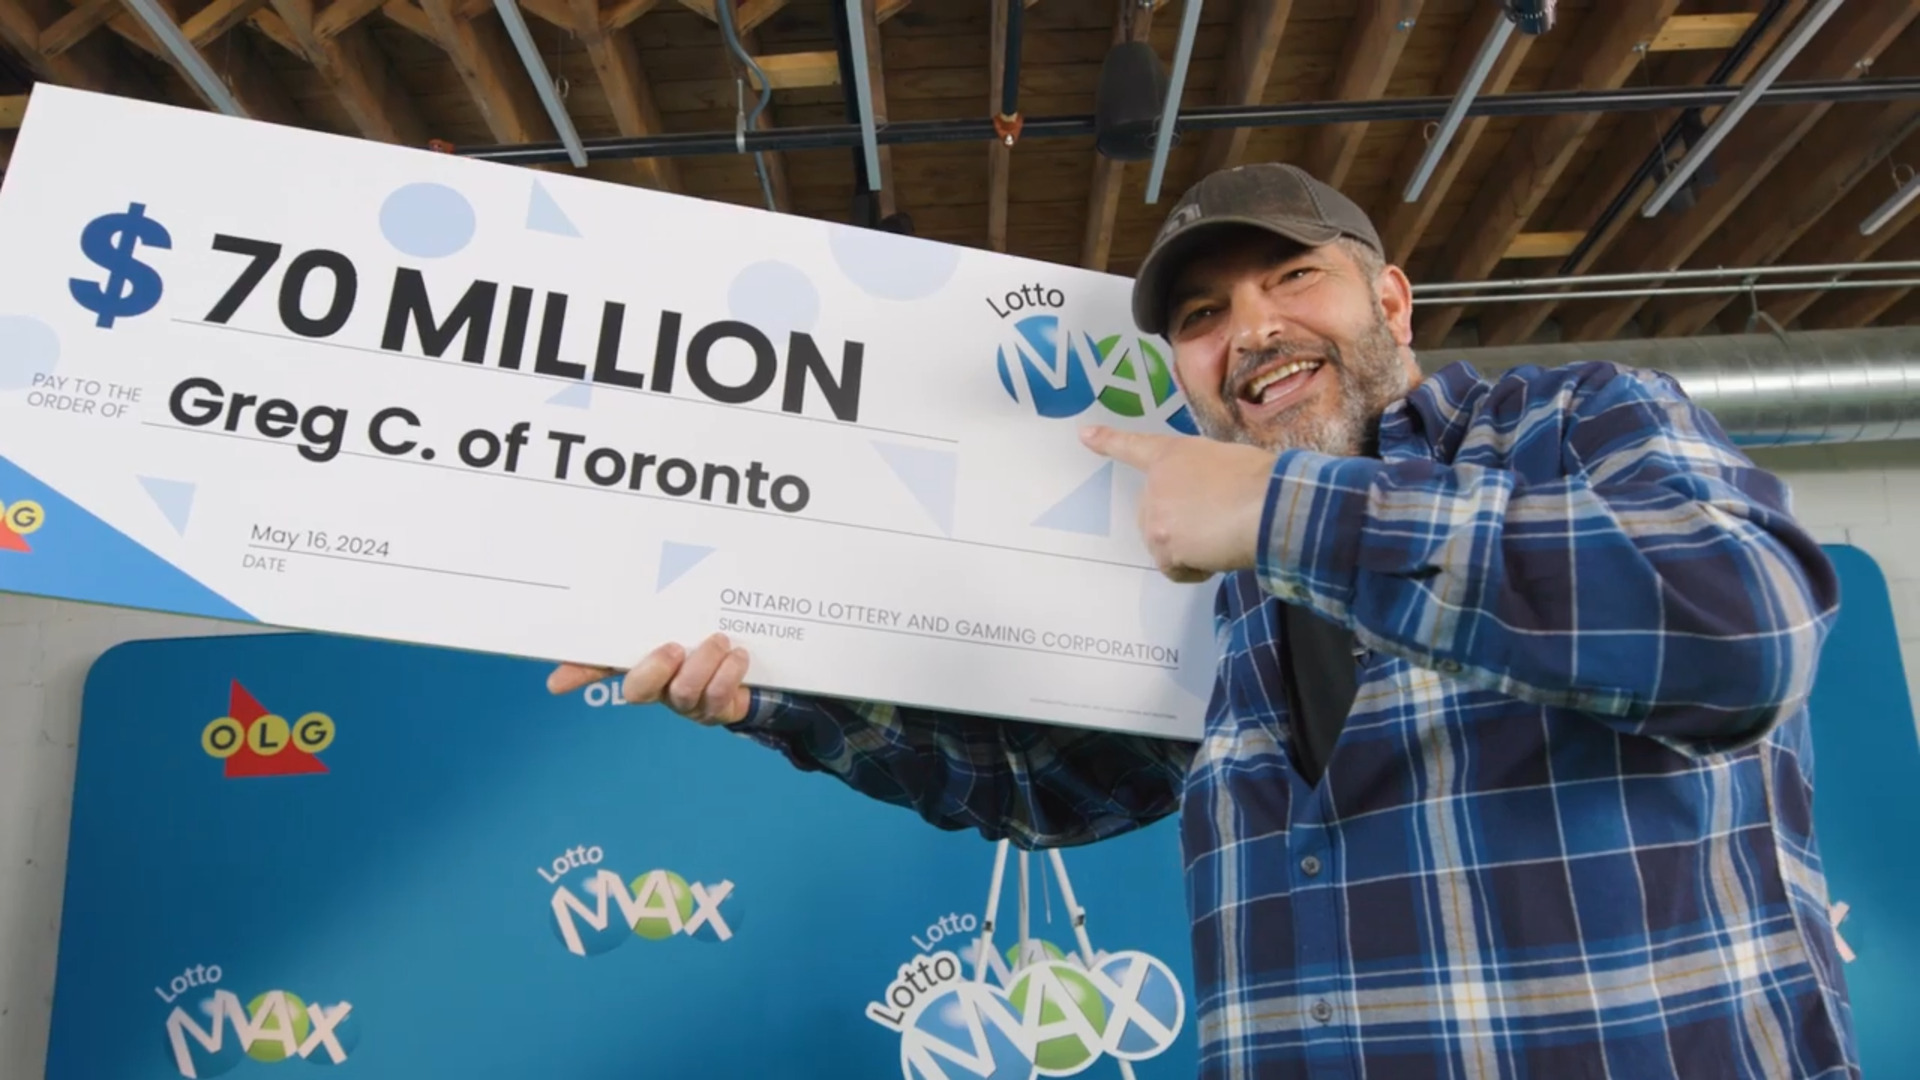 Toronto man falls to his knees in disbelief after receiving $70M from LOTTO MAX win